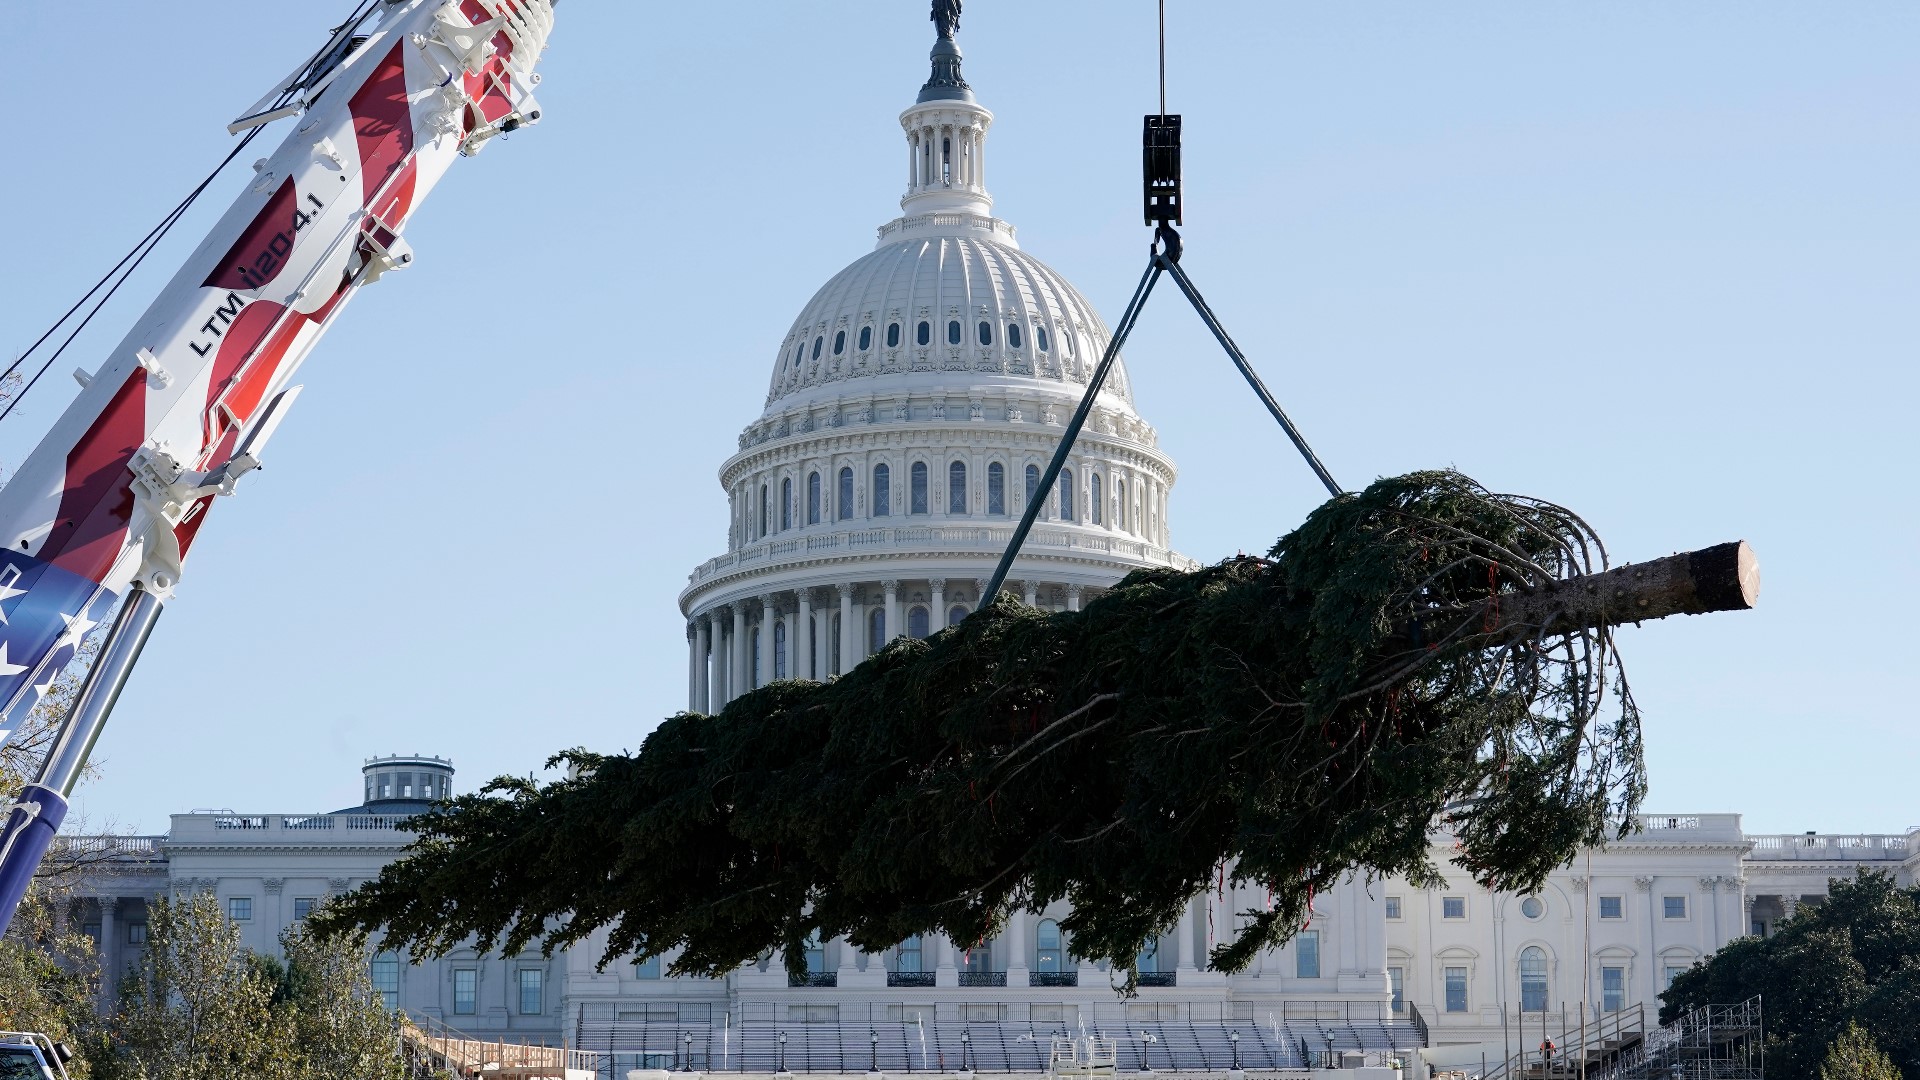 It's only the fourth time a tree from Colorado has been chosen as the U.S. Capitol Christmas tree.